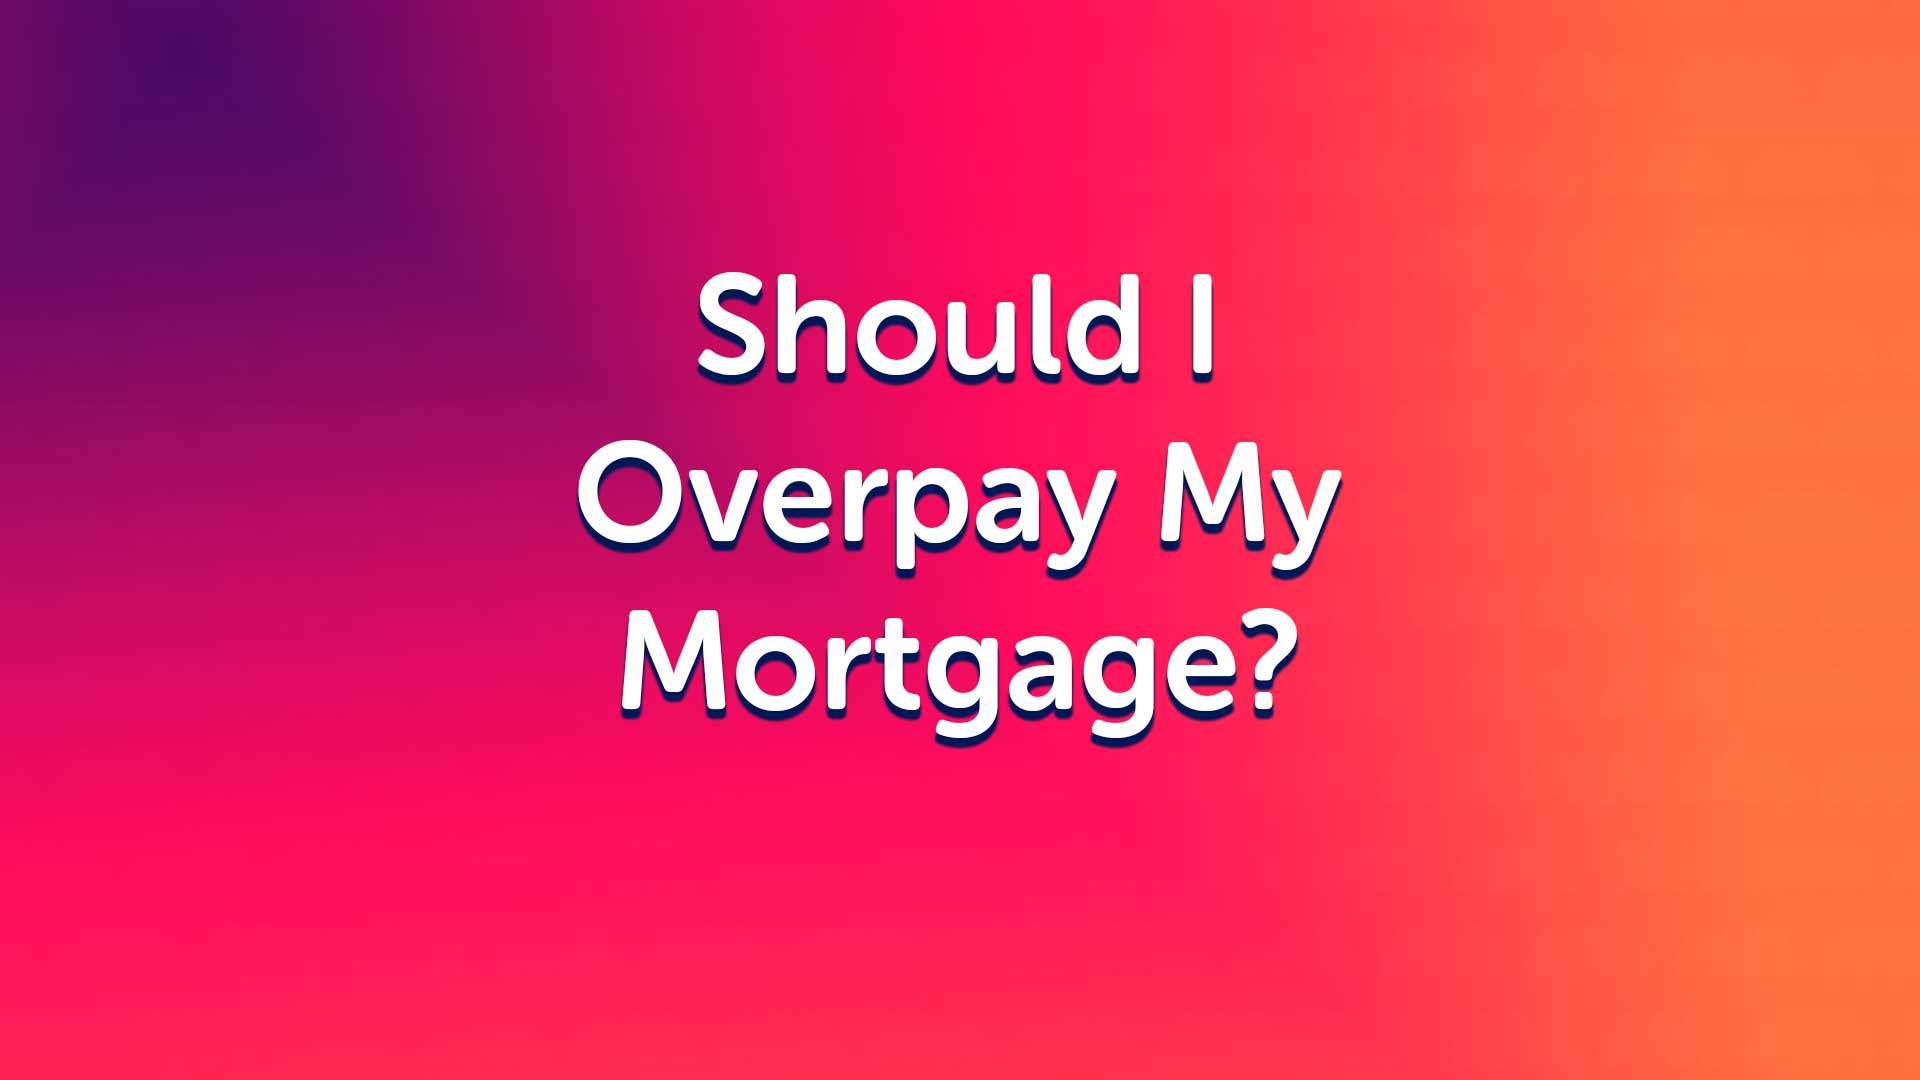 Why People Aren't Overpaying Mortgages?